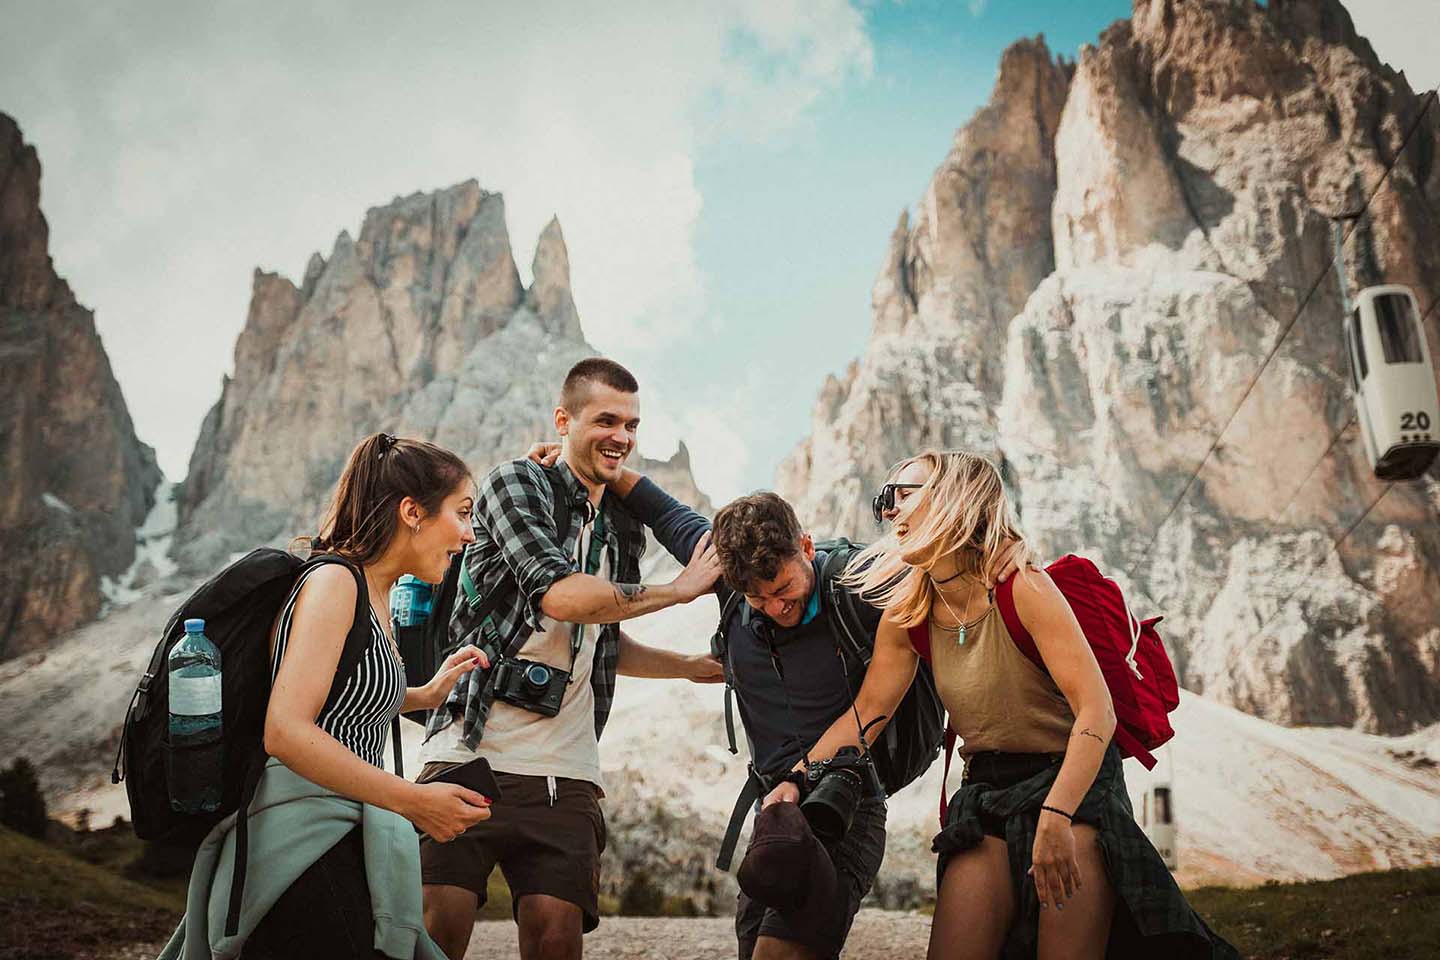 Group of friends laugh together in front of a large mountain range.